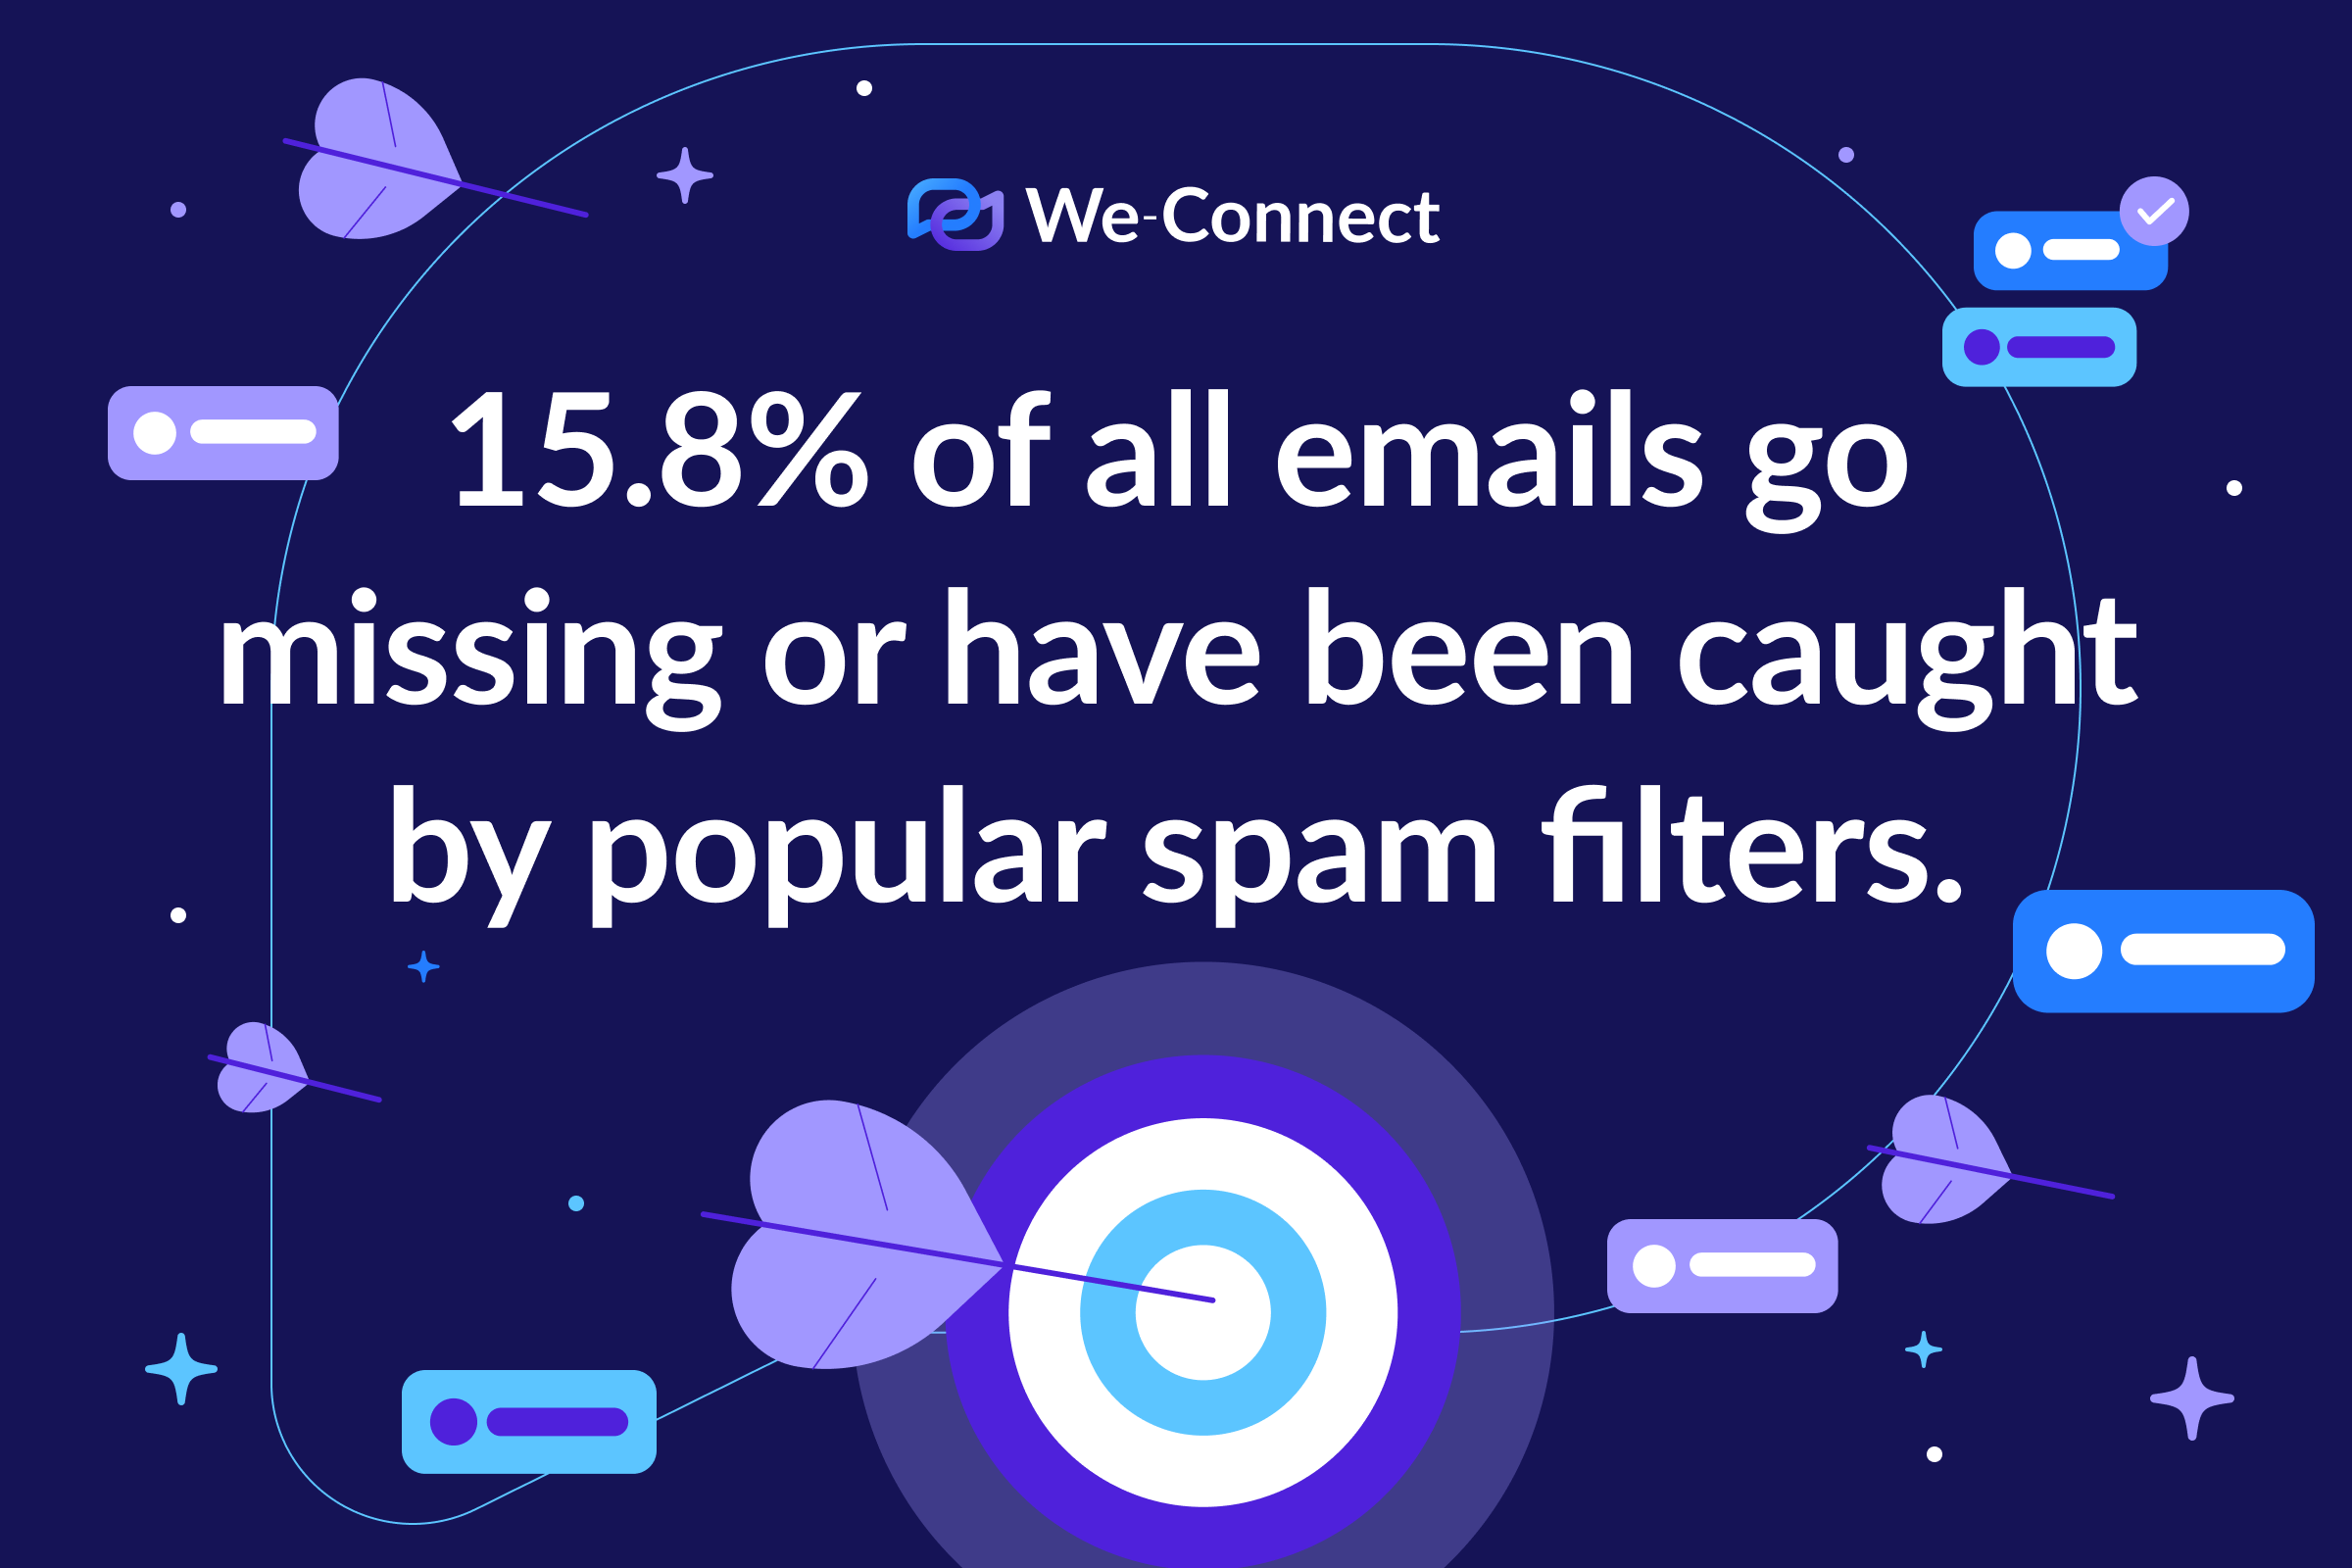 15.8% of all emails go missing or have been caught by popular spam filters